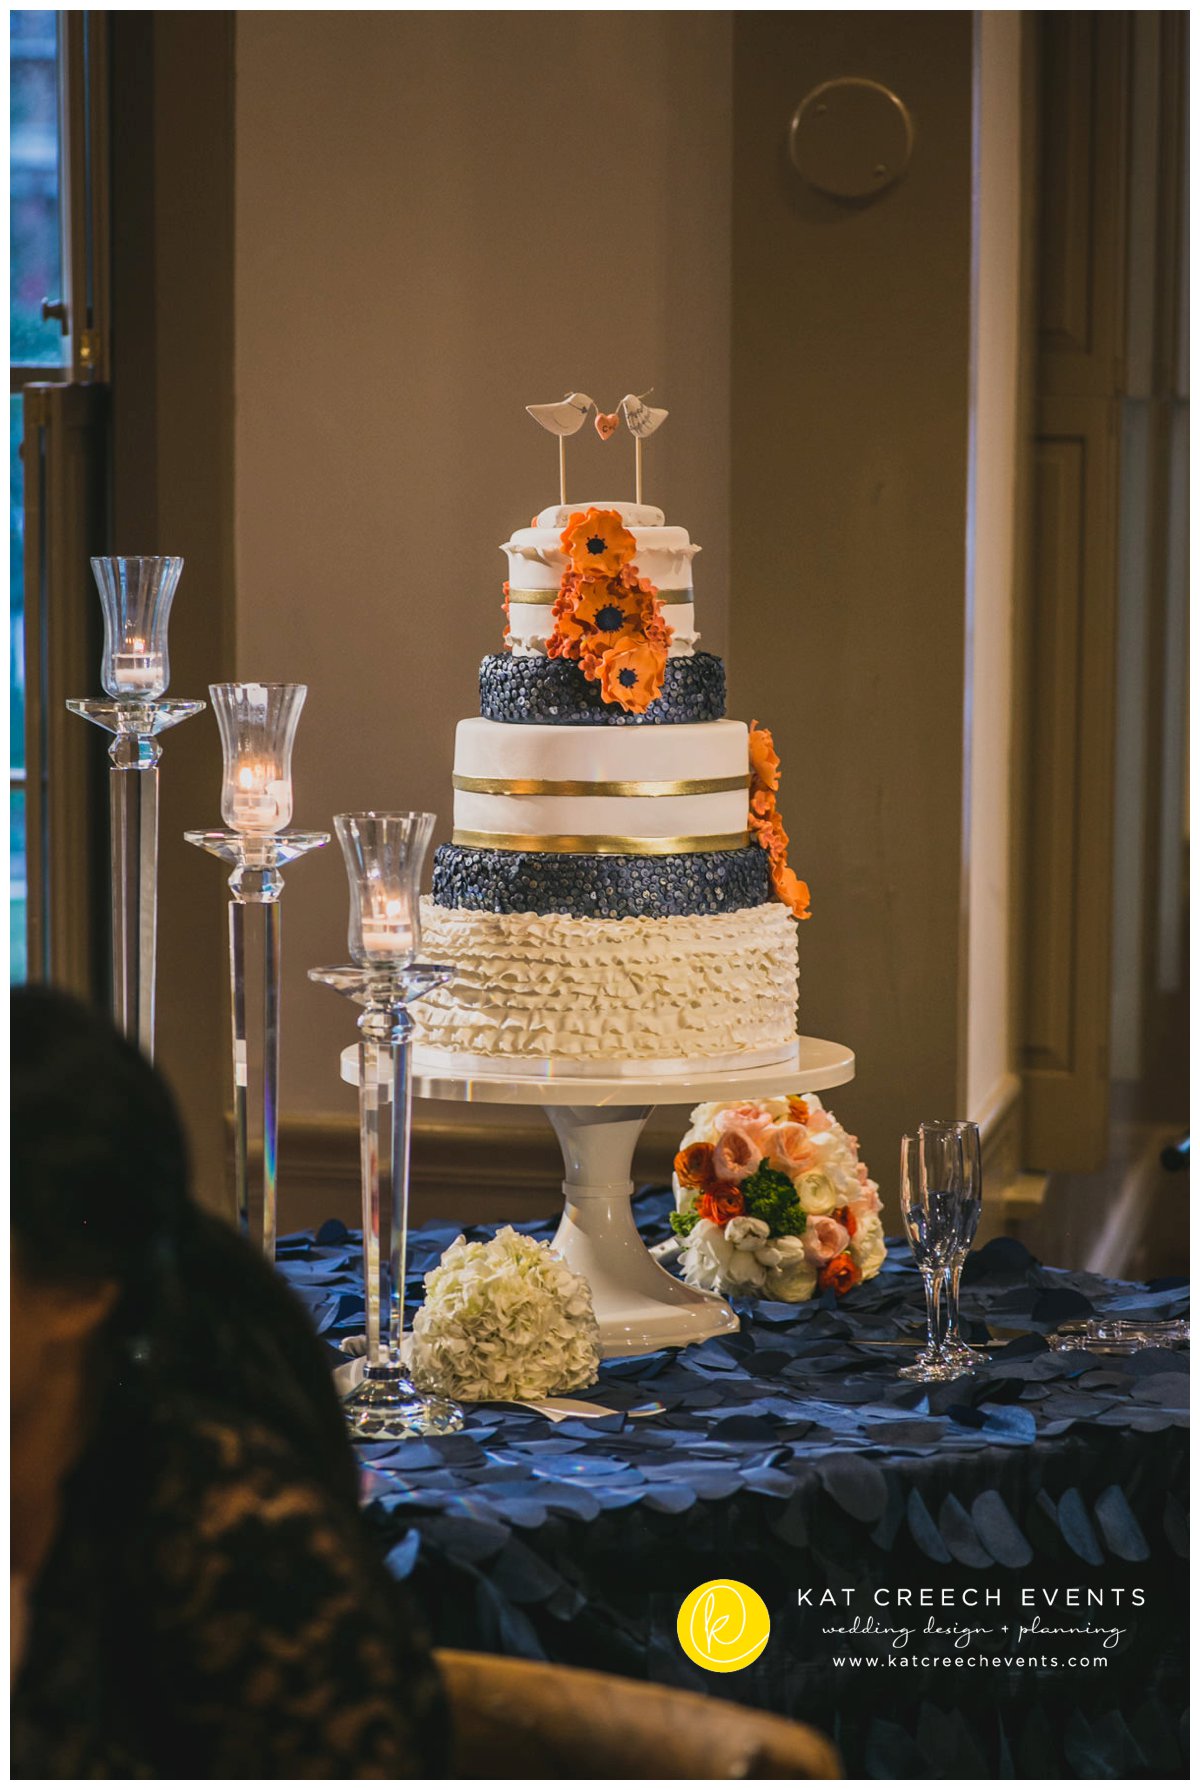 ivory, white, and coral wedding cake | unique wedding cake | bird cake topper | ruffled wedding cake | Kat Creech Events